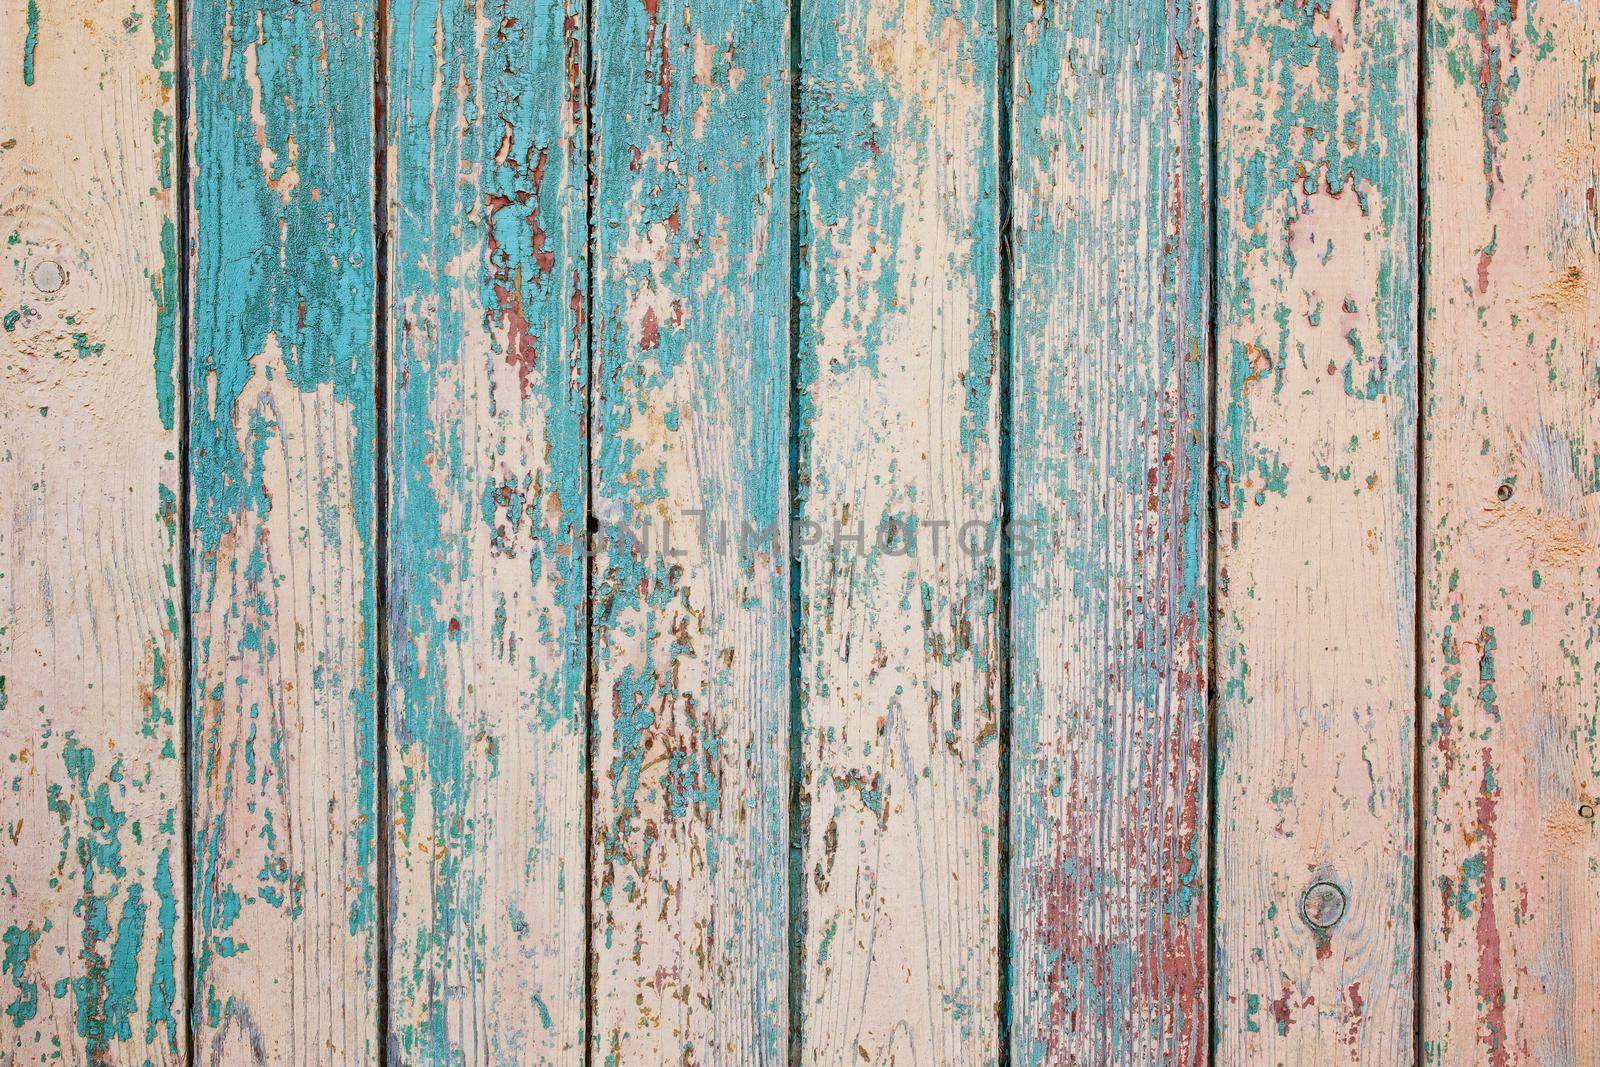 Wooden vertical texture of turquoise Colors, shabby wooden surface. Old texture for antique background Old texture for antique background by AlexGrec